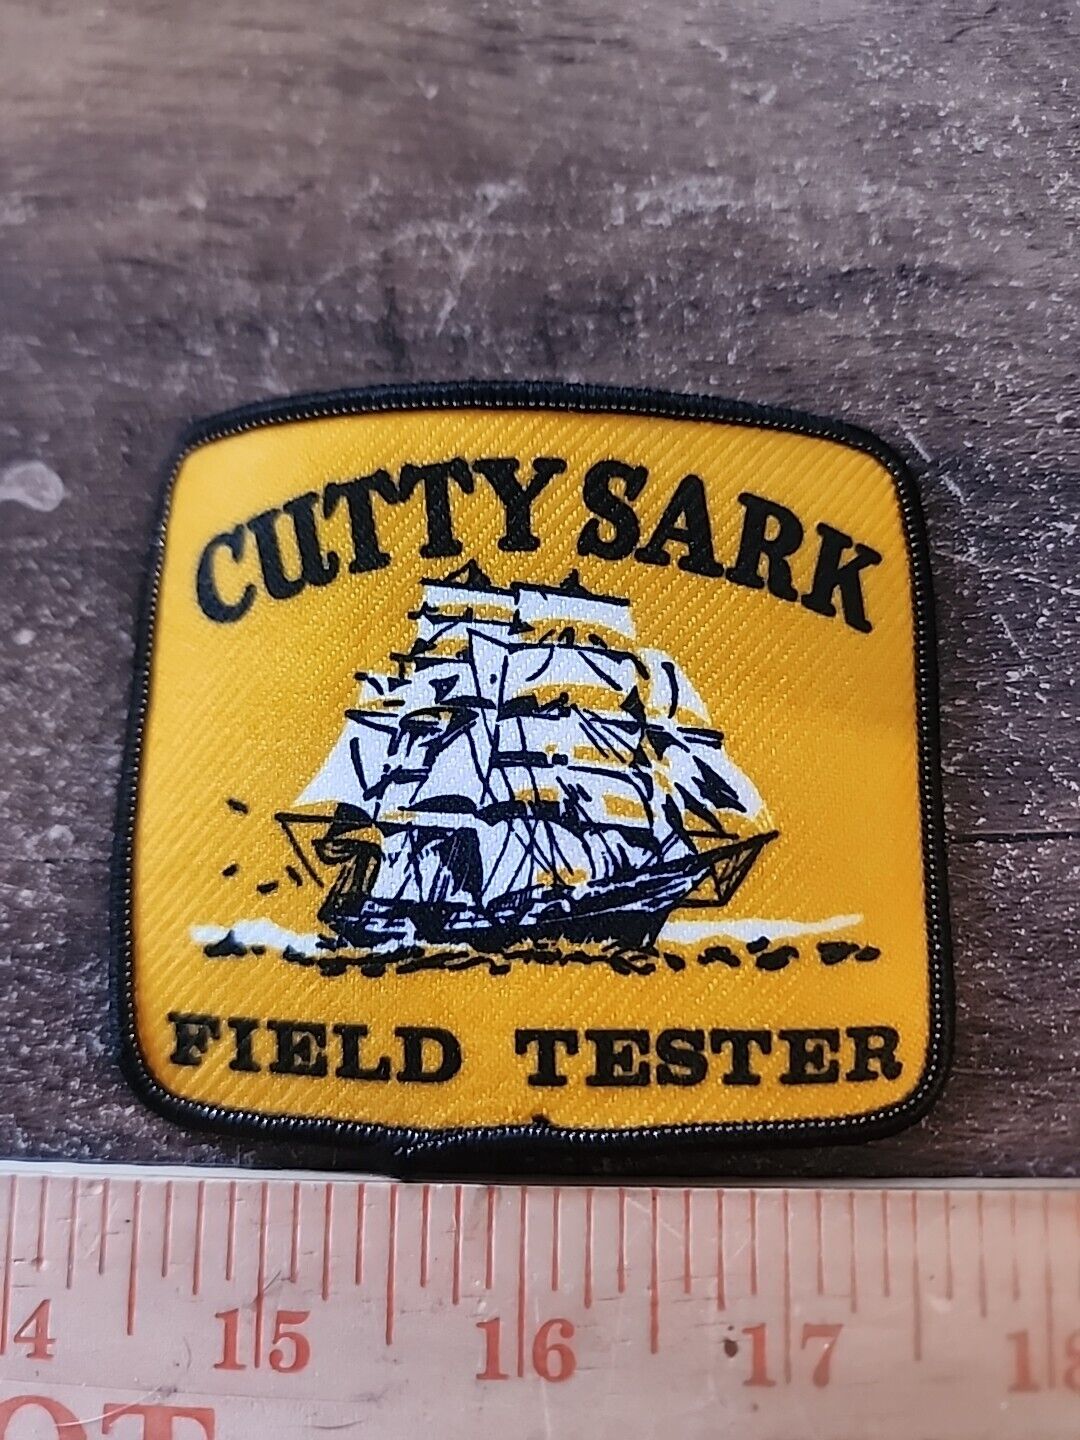 Vintage Cutty Sark Field Tester Glue Or Sew On Patch 